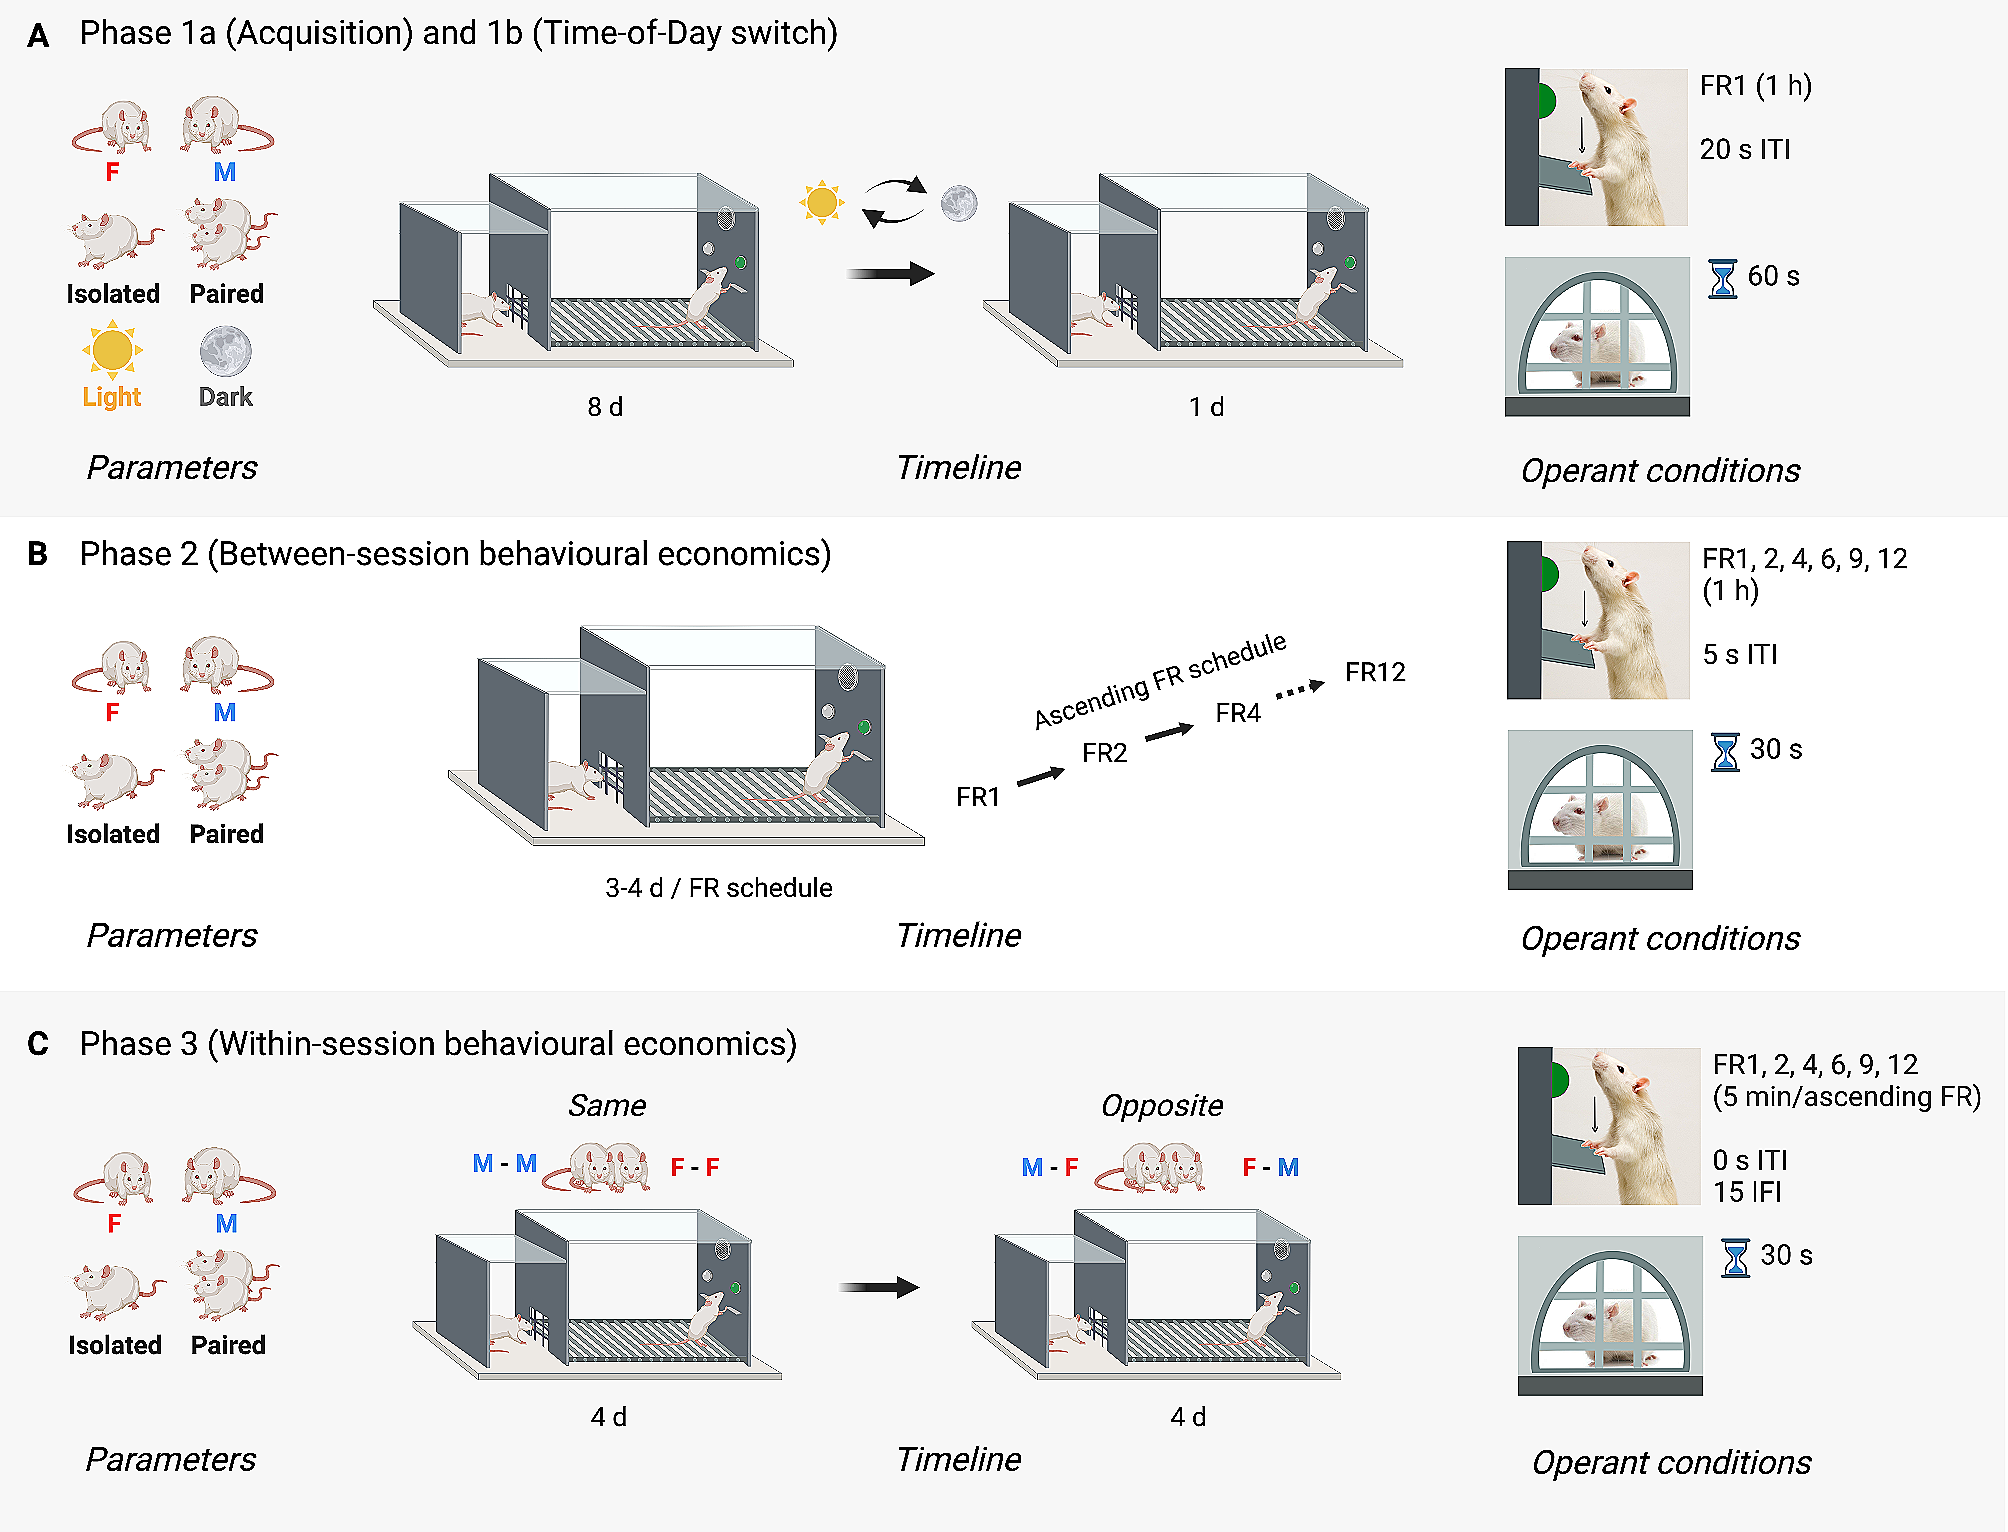 Sex differences in the social motivation of rats: Insights from social operant conditioning, behavioural economics, and video tracking